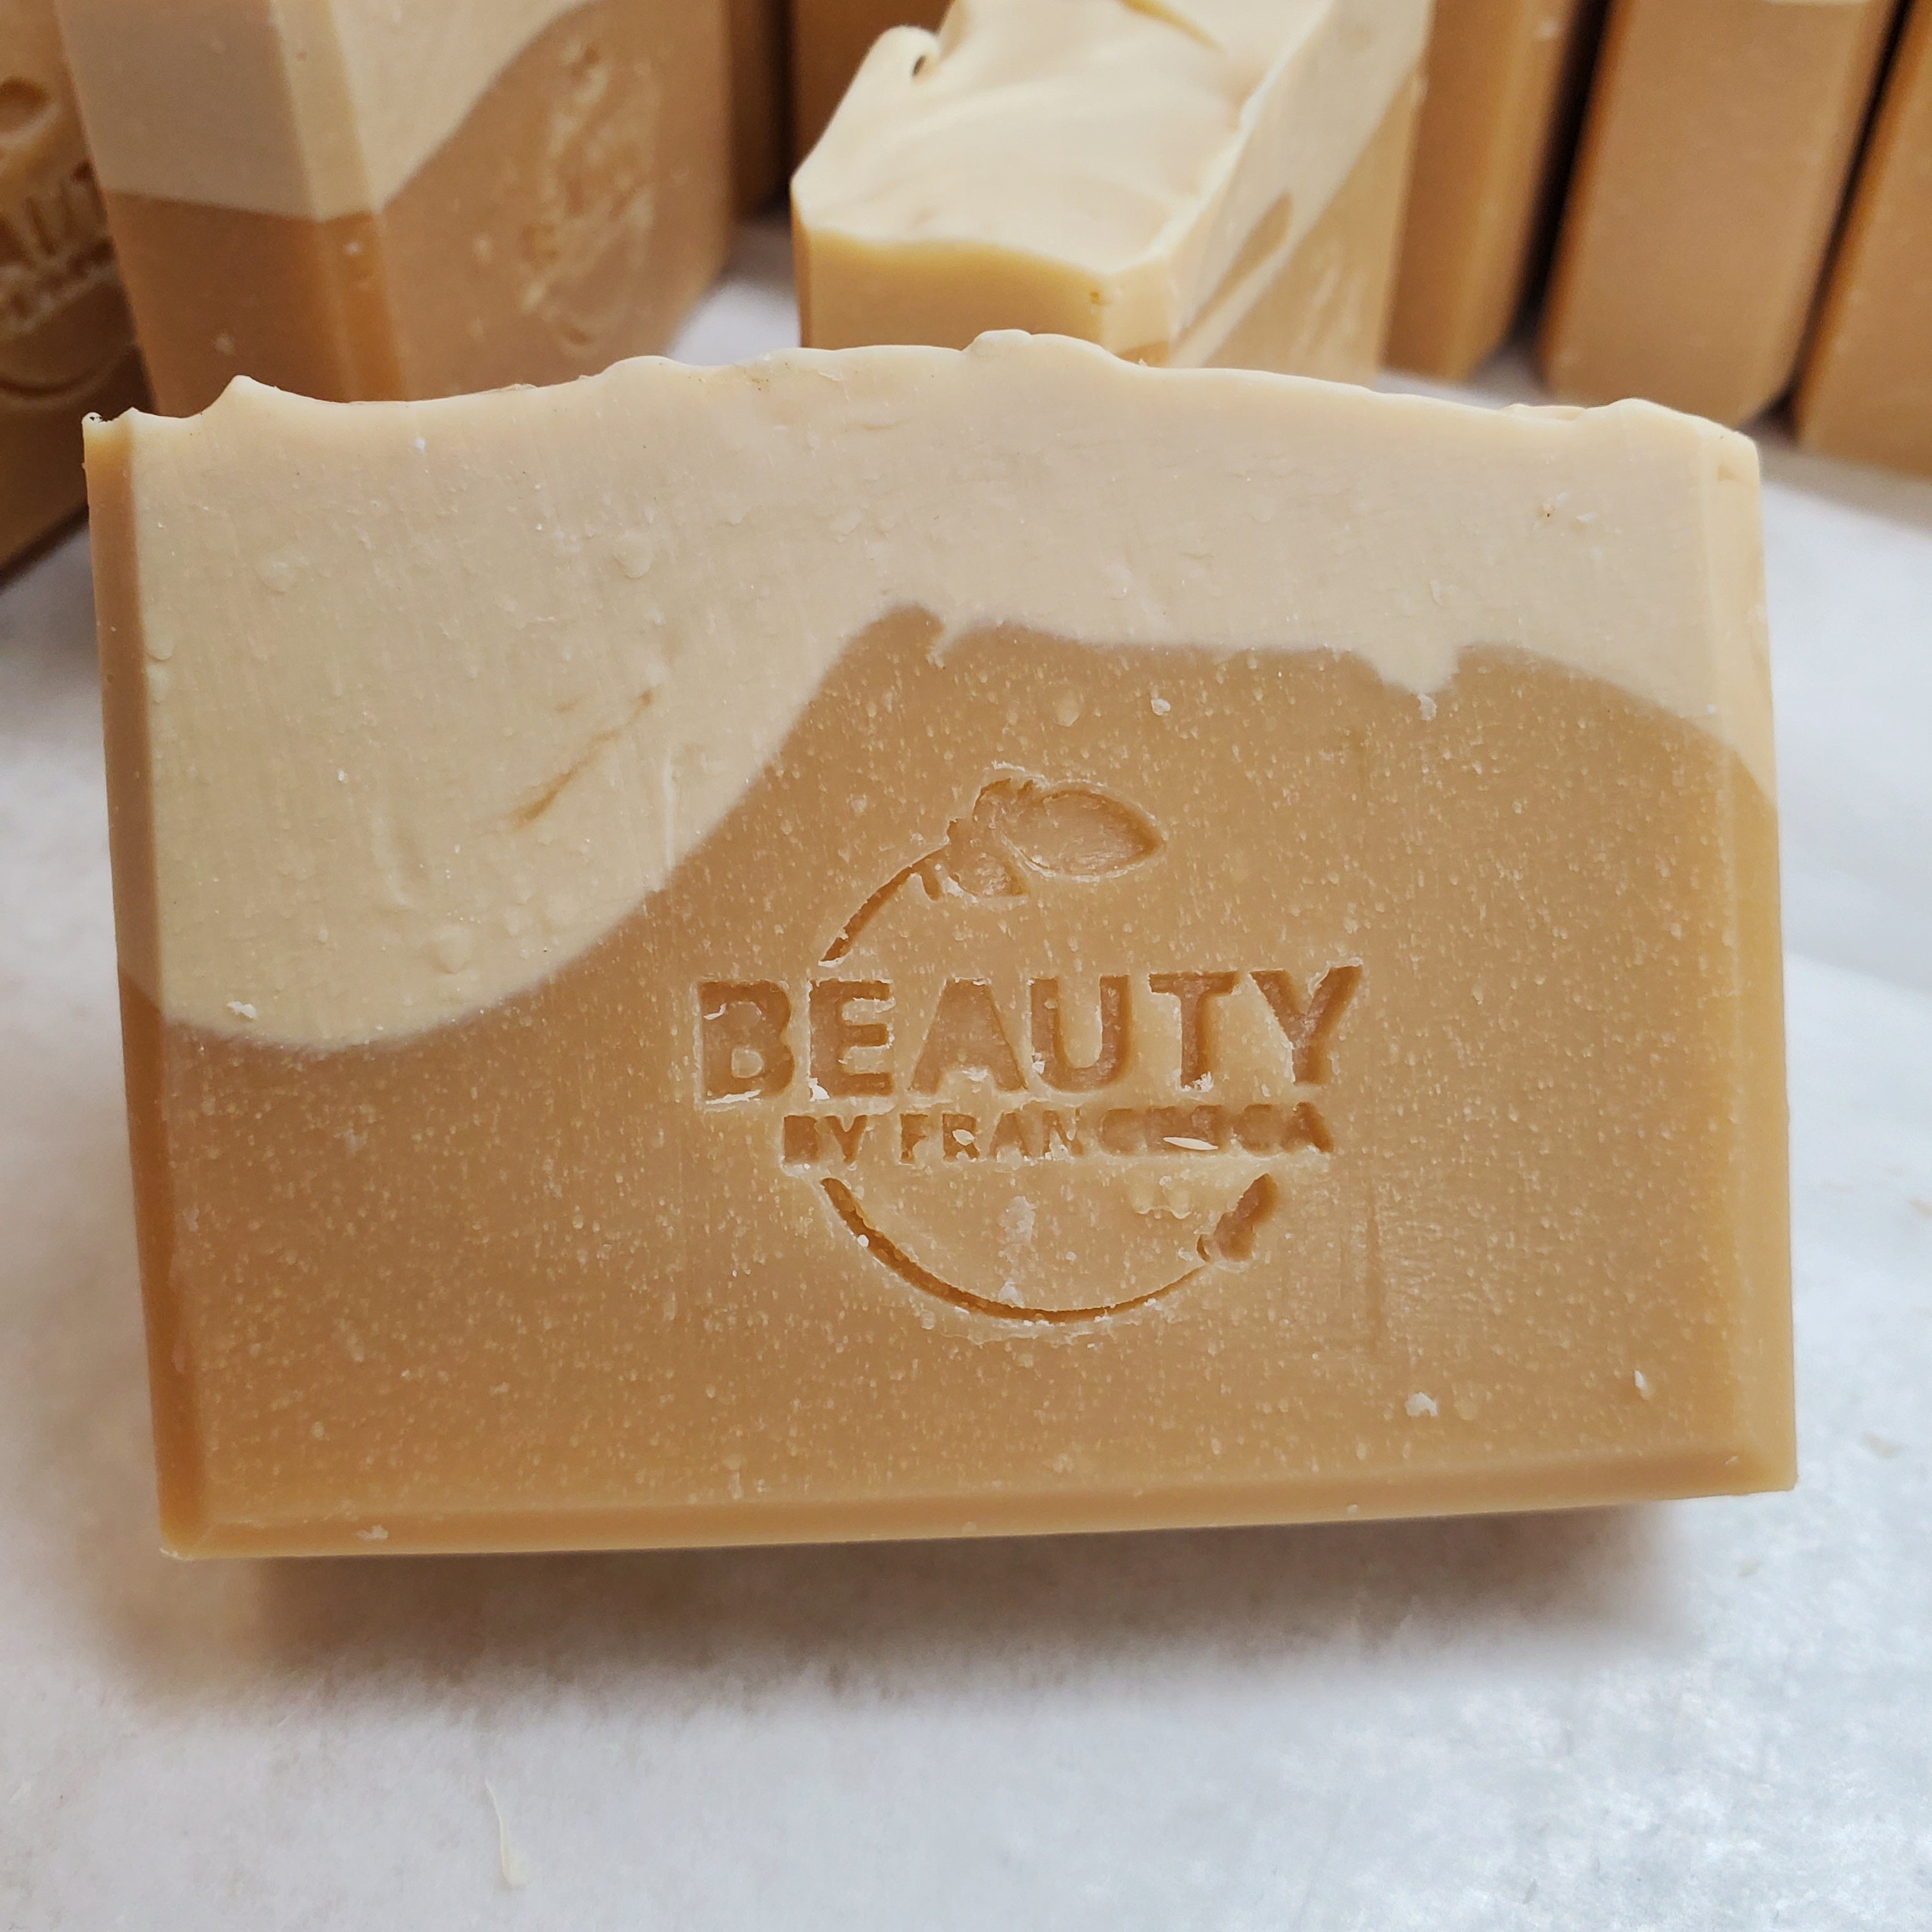 Handmade Natural Beer Soap Bar - Pale Ale IPA close up with several bars in background